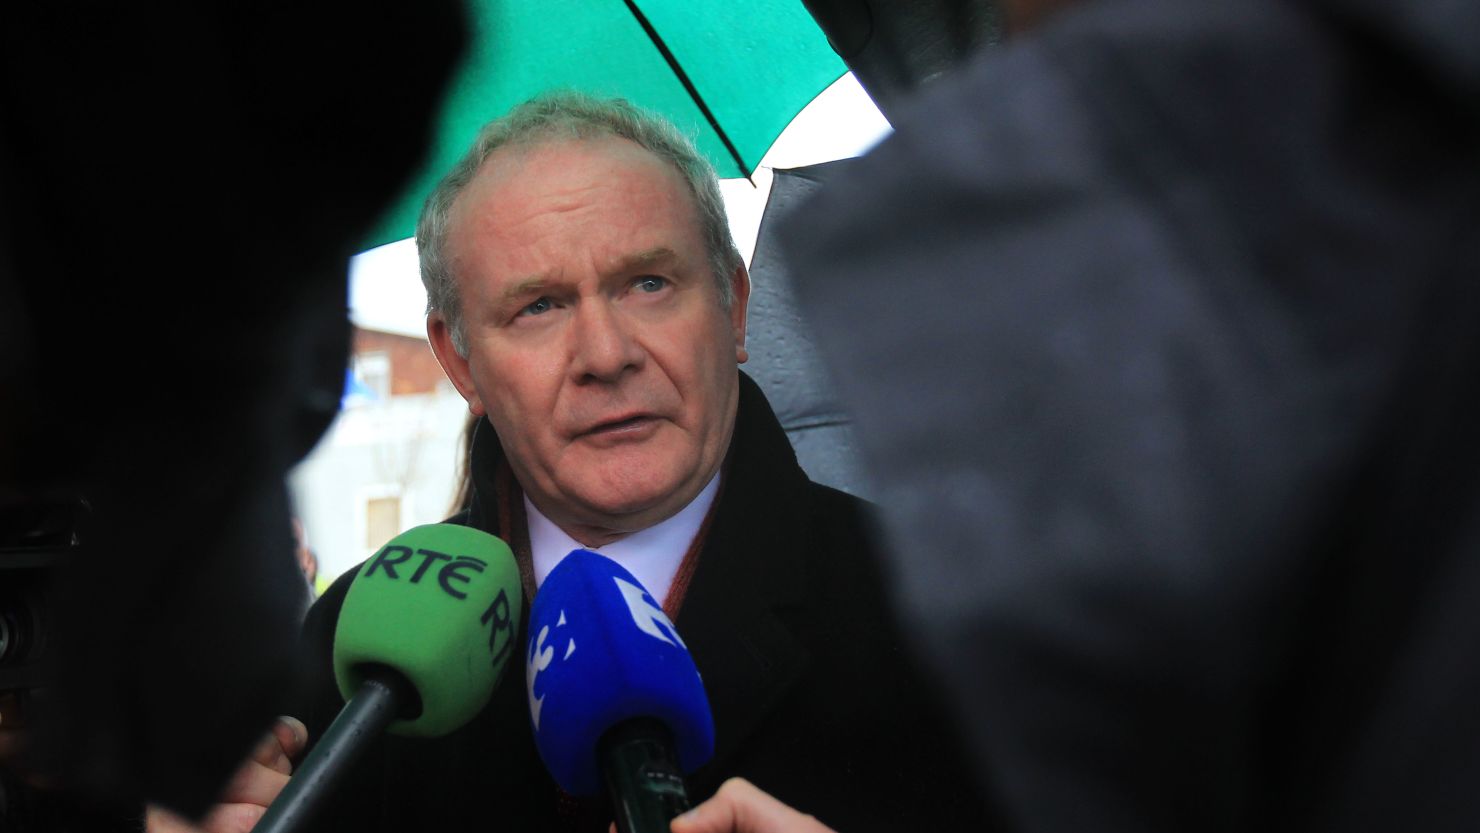 Martin McGuinness, once a commander in the Irish Republican Army, has resigned as Northern Ireland's Deputy First Minister.